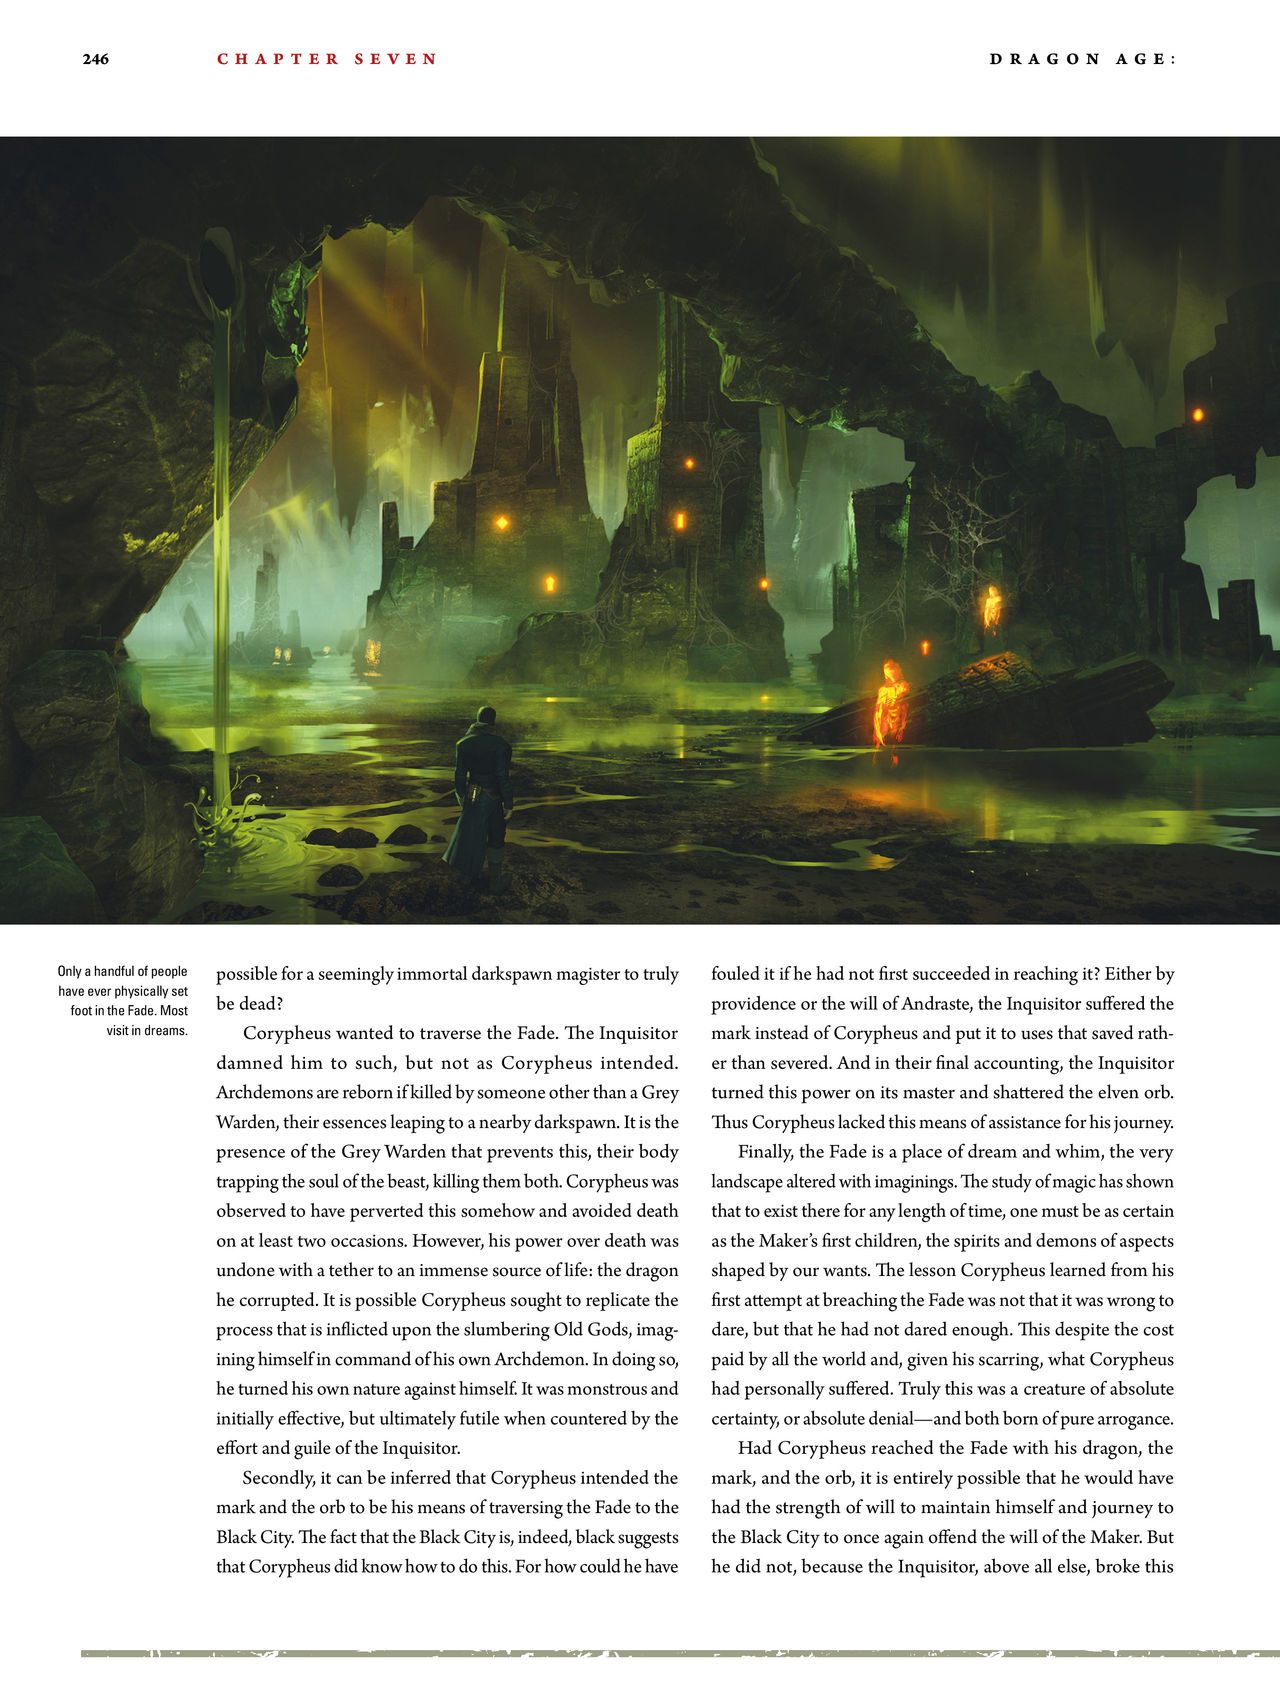 Dragon Age - The World of Thedas v02 240